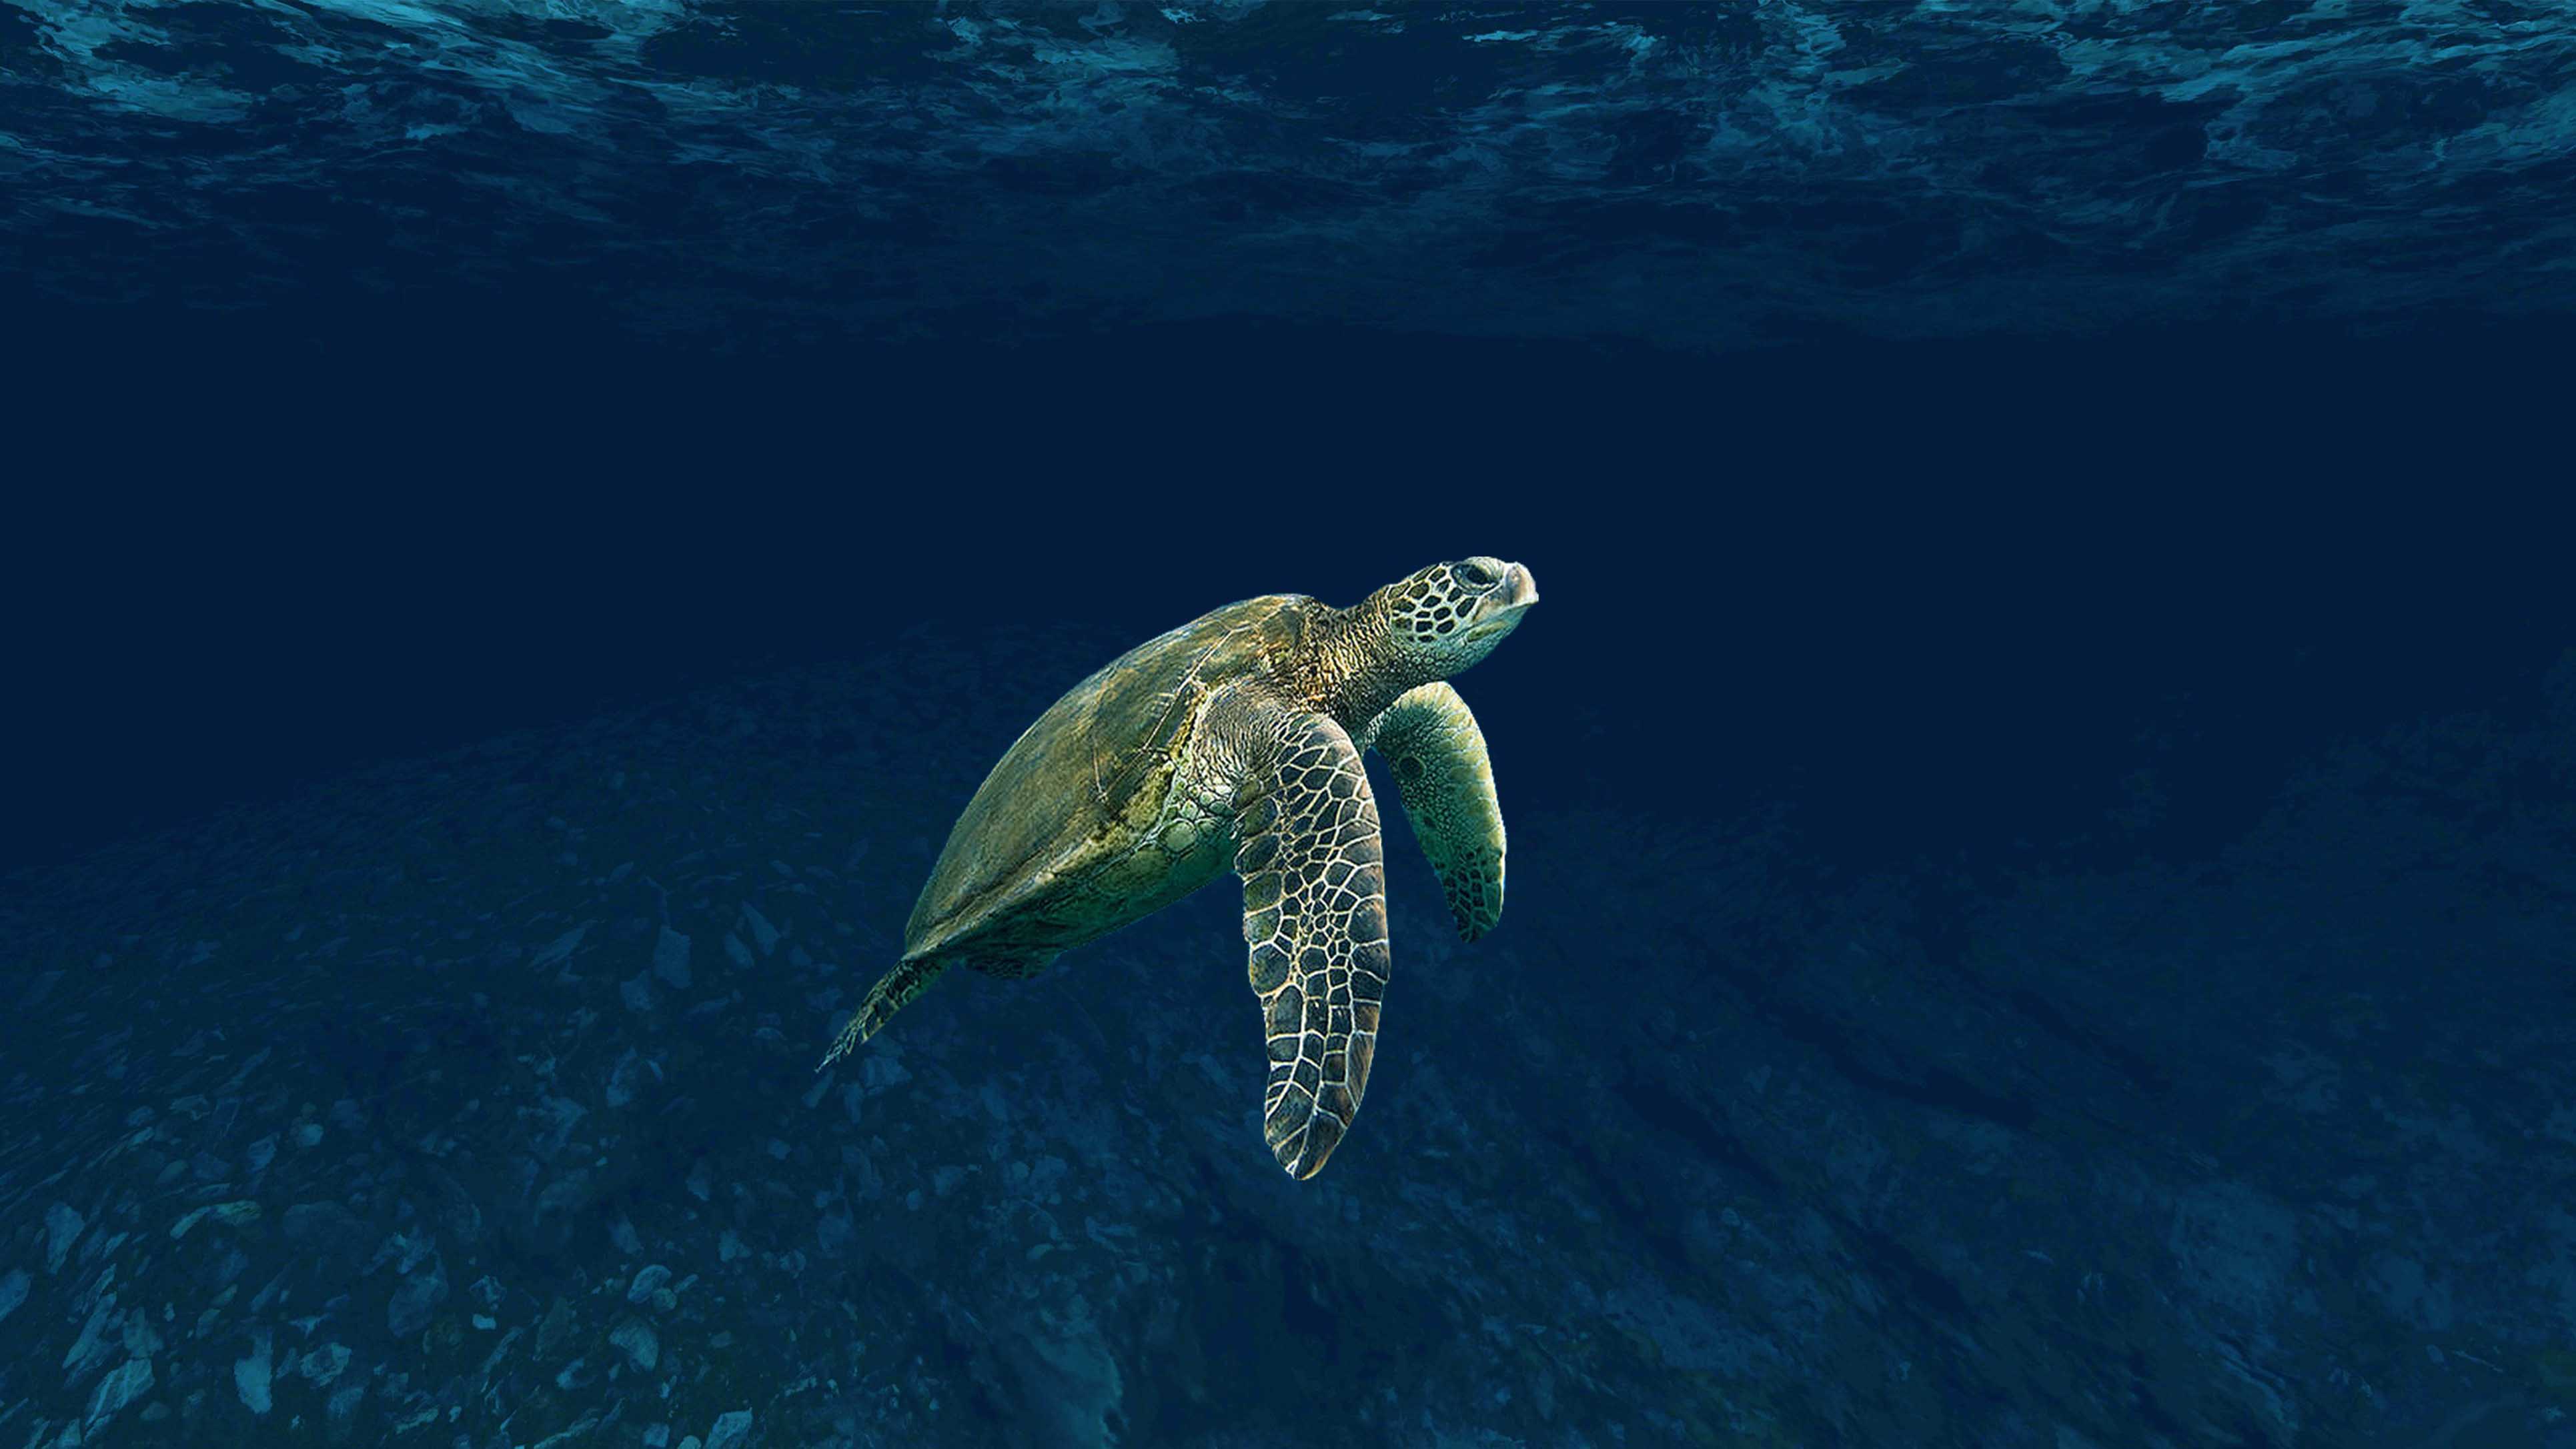 Photo of a large turtle swimming in navy blue waters